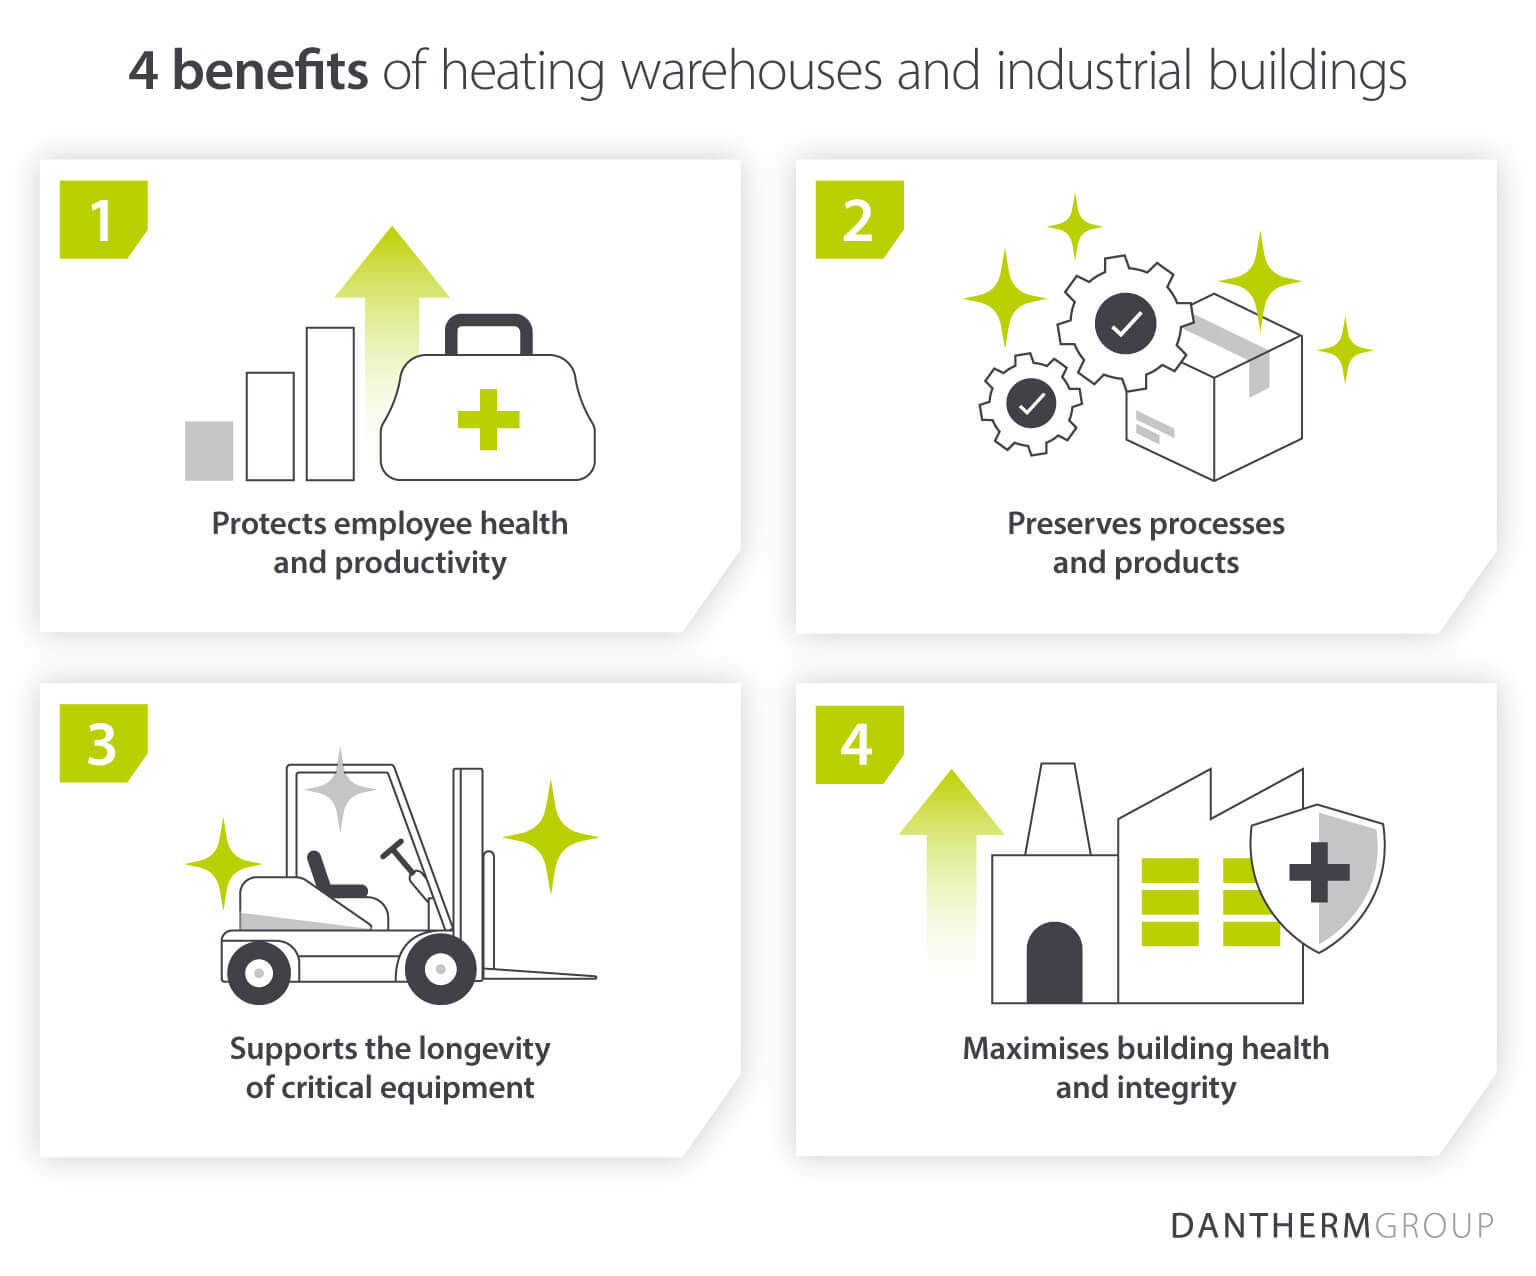 4 benefits of heating warehouses and industrial buildings